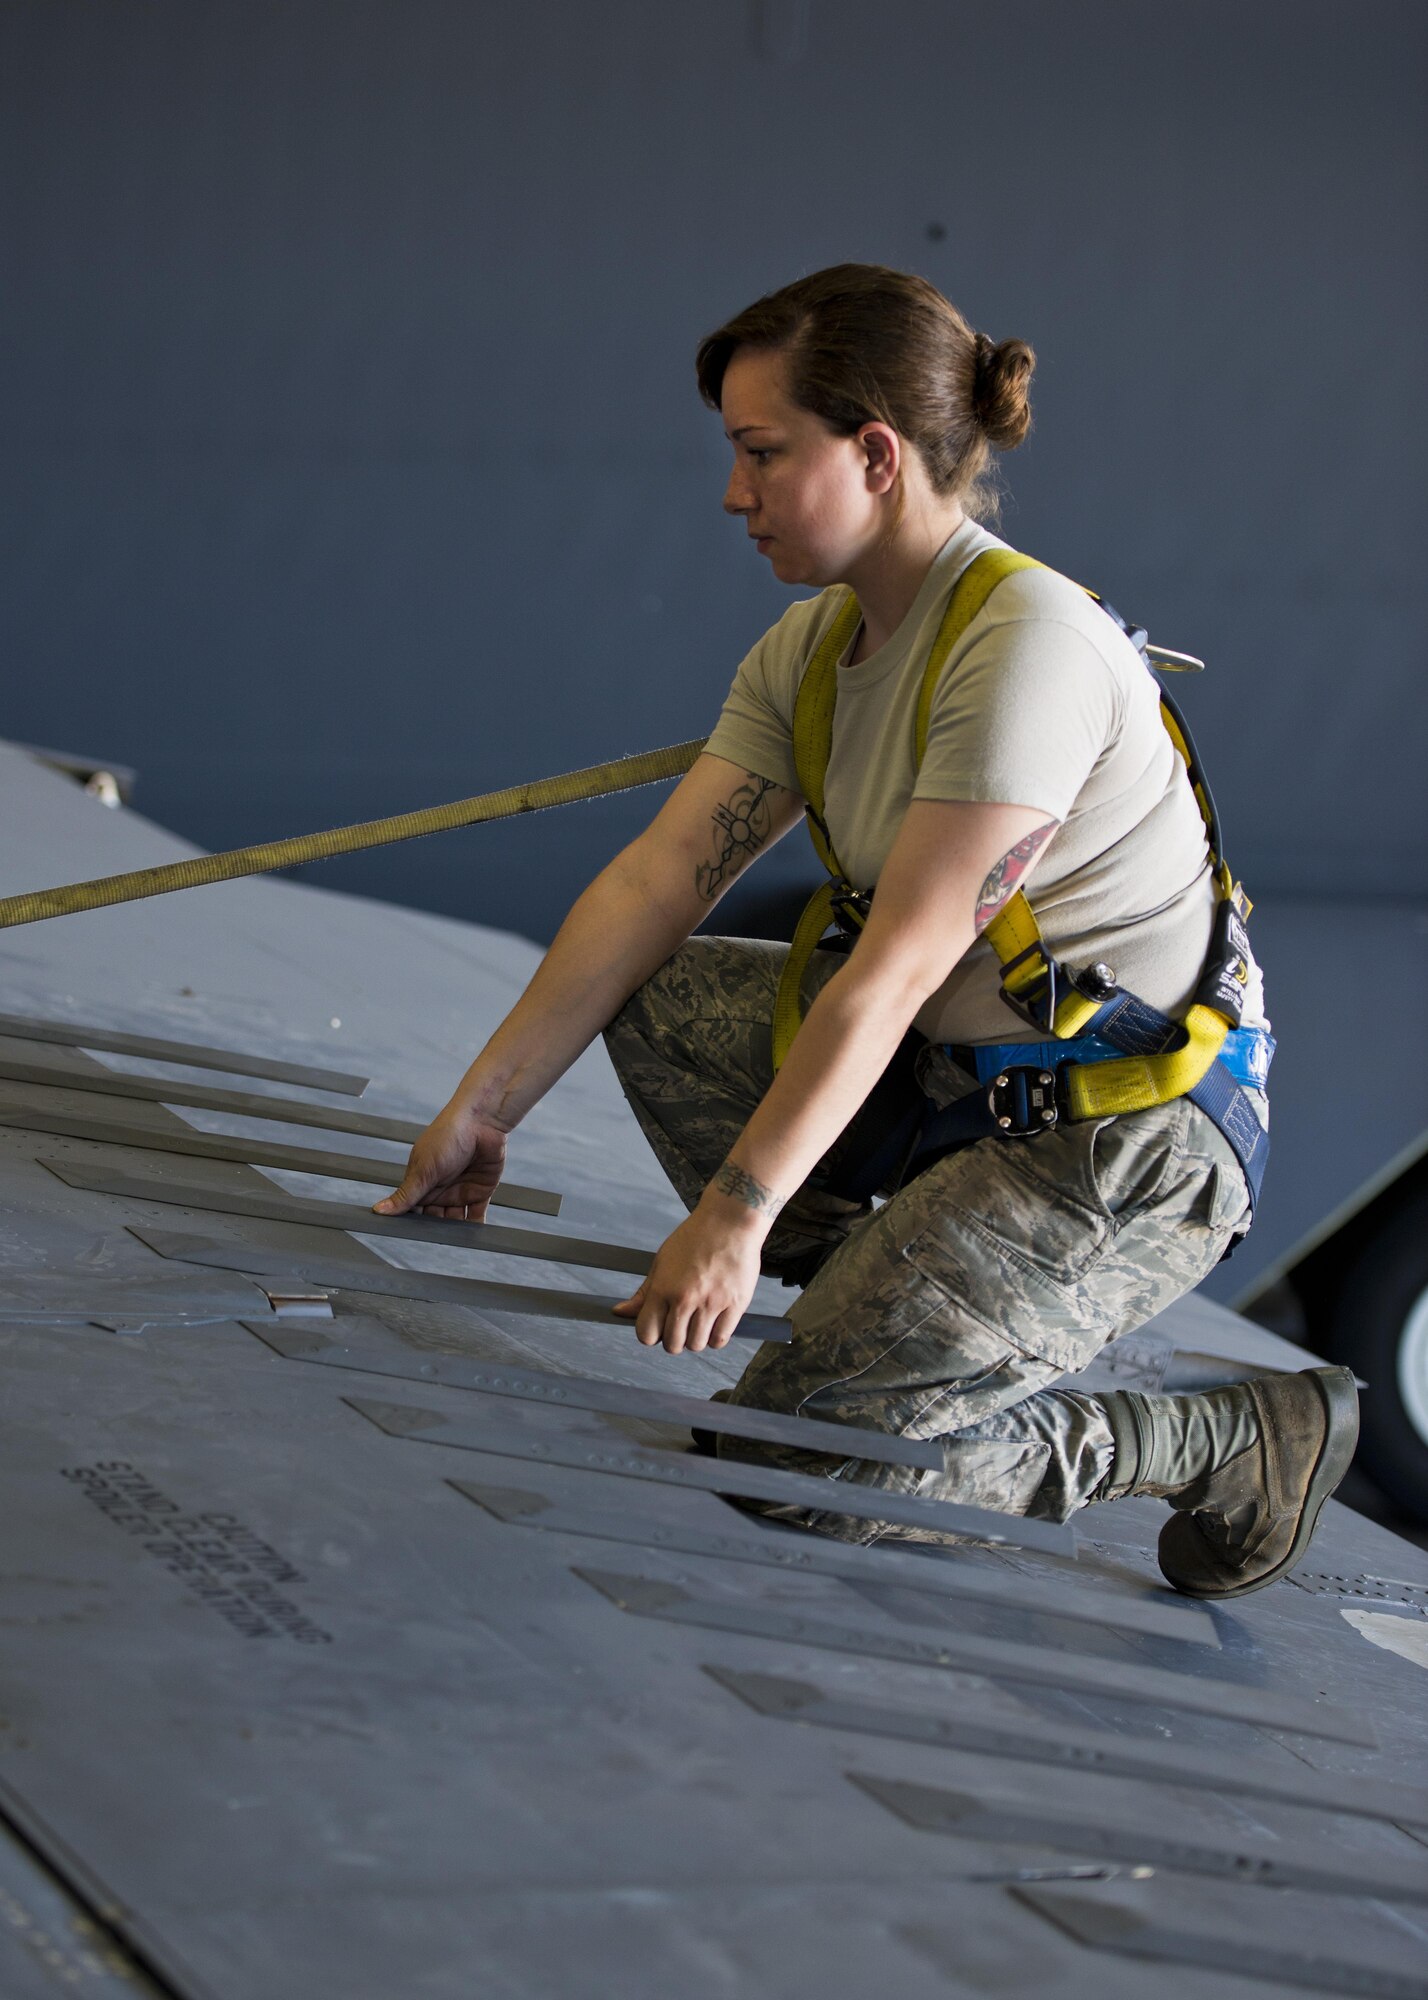 Senior Airman Amanda Scanlan, 5th Maintenance Squadron aircraft structural maintenance, lifts a spoiler atop the wing of a B-52H Stratofortress at Minot Air Force Base, N.D., August 2, 2016. Scanlan must check the aircraft for foreign objects and debris after making repairs. (U.S. Air Force photo/Airman 1st Class J.T. Armstrong)